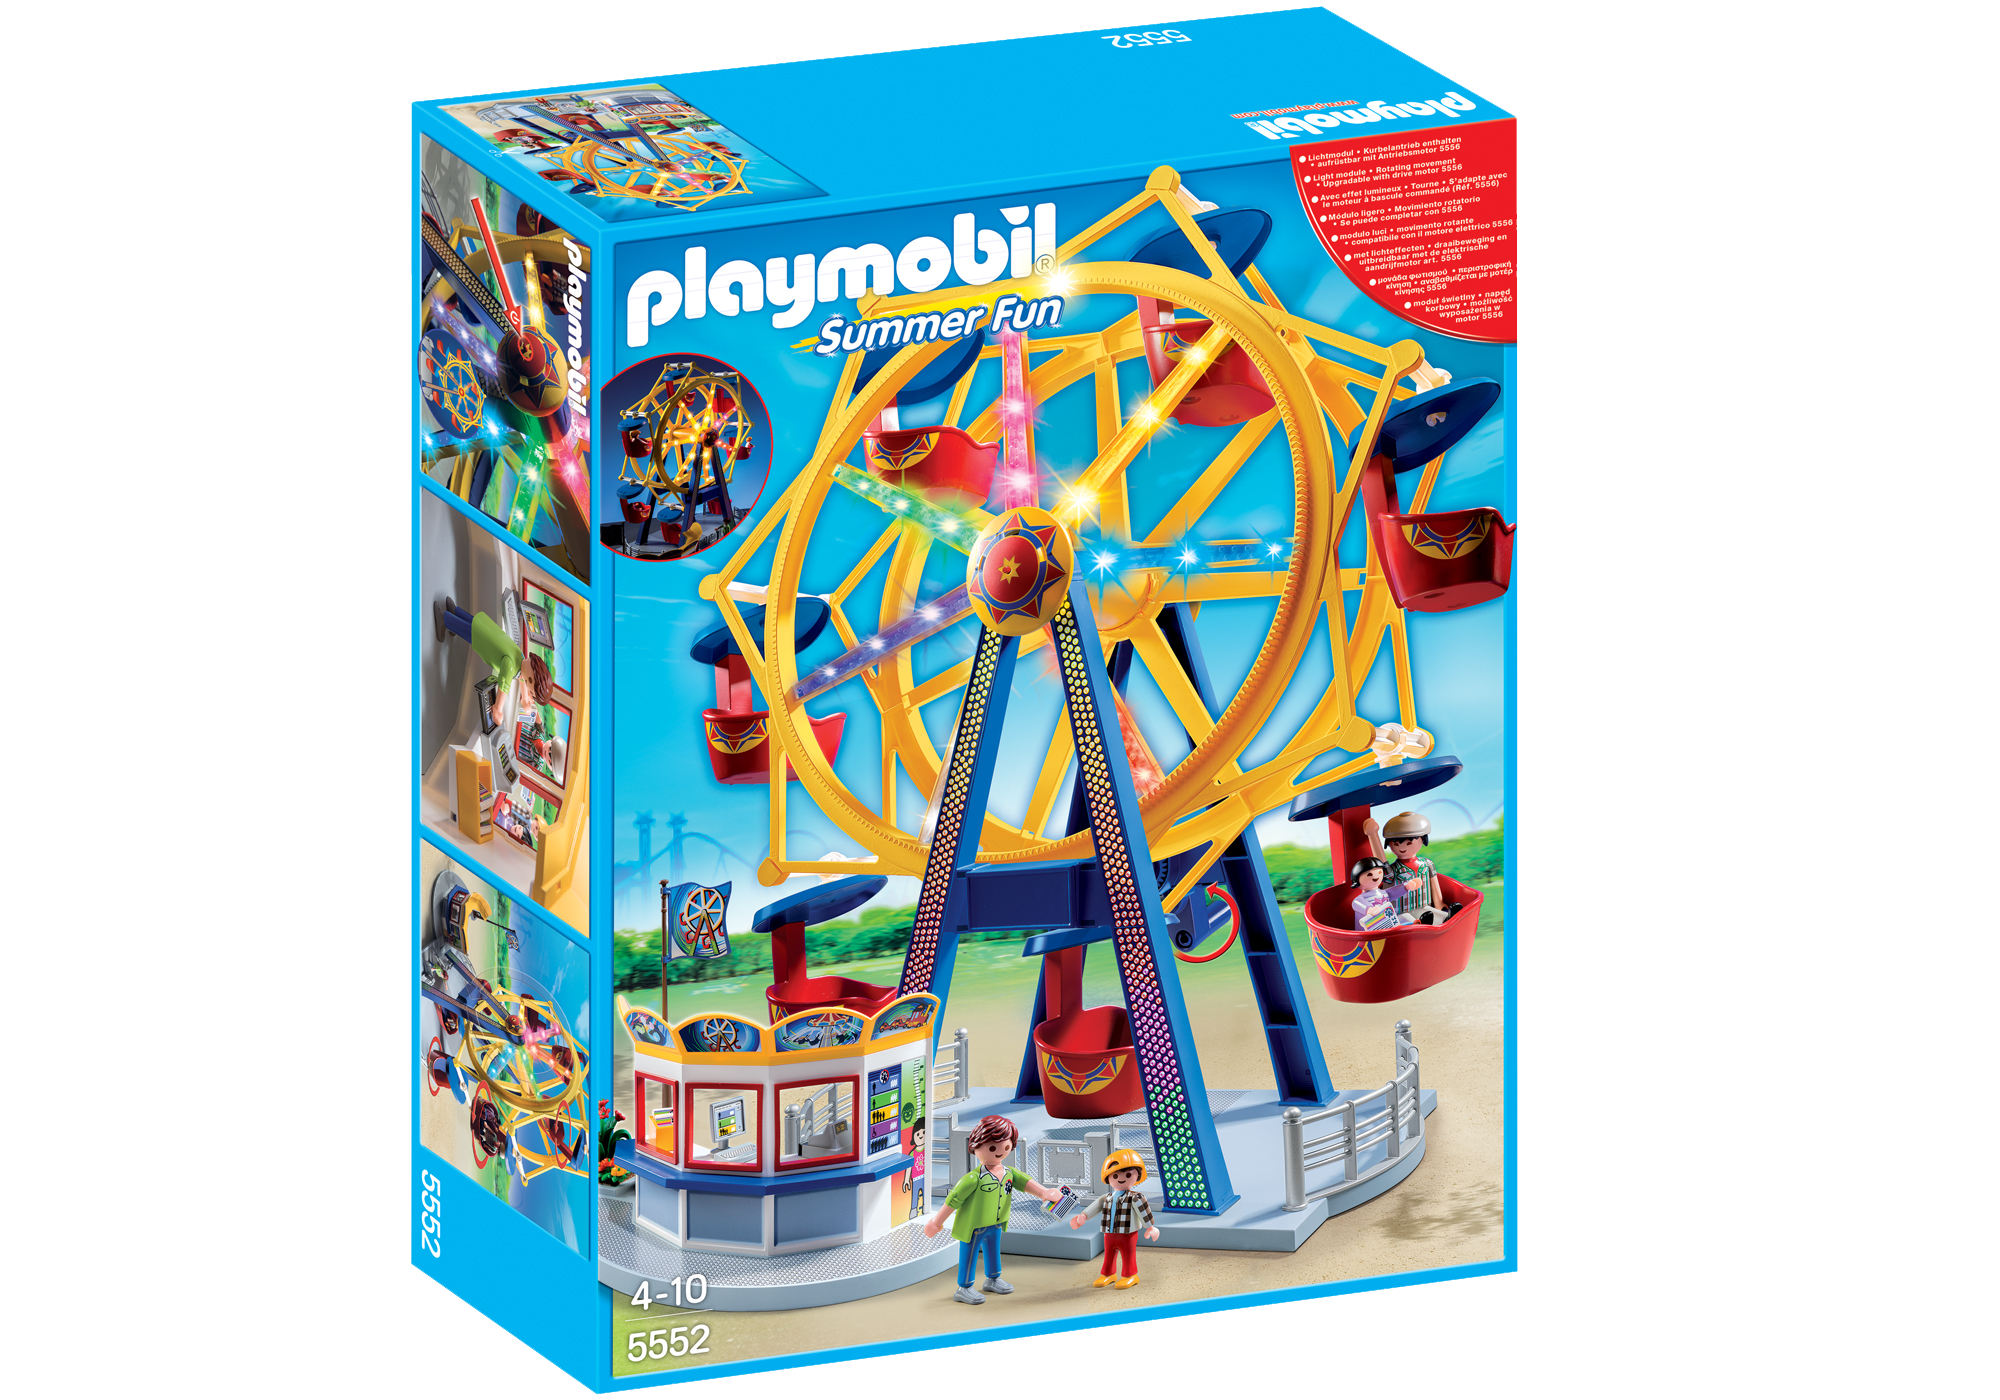 playmobil fete foraine pack